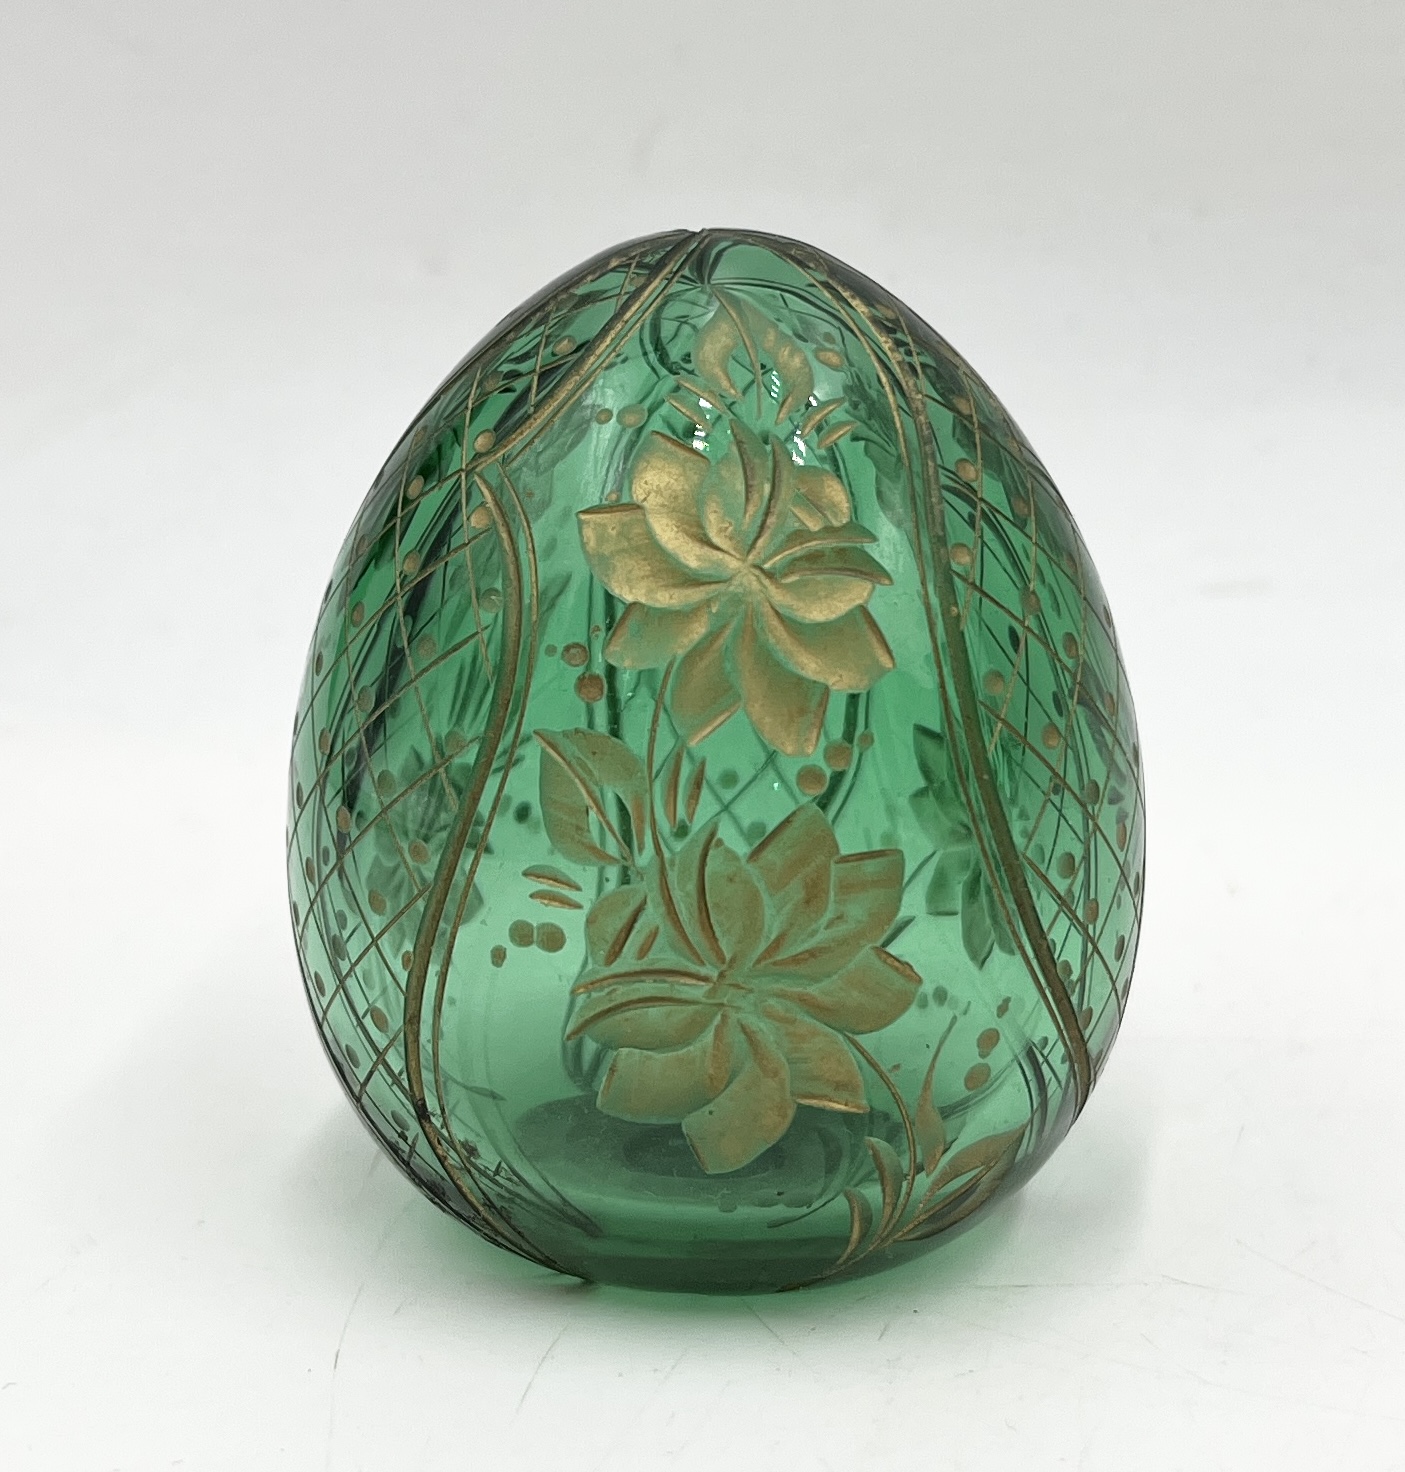 Faberge Modern egg in green glass with gilded detail, made in Russia - height approx. 5cm